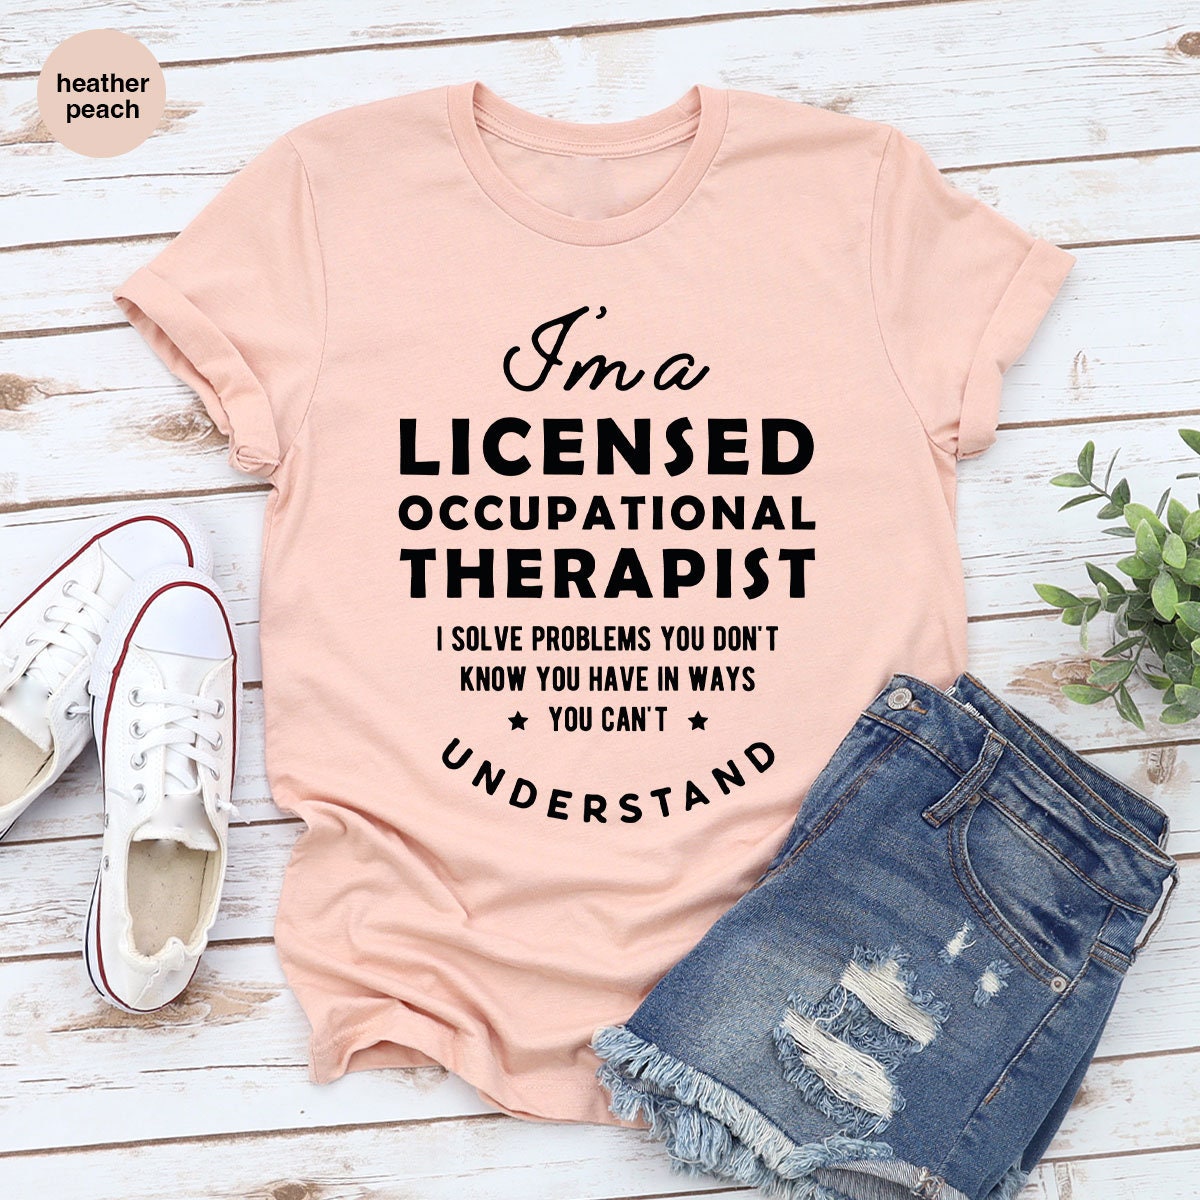 Discover Occupational Therapy Outfit, Motivational Shirt, Therapist Sweatshirt, Occupational Therapist T-Shirt, Gift for Therapist, Occupational Tees